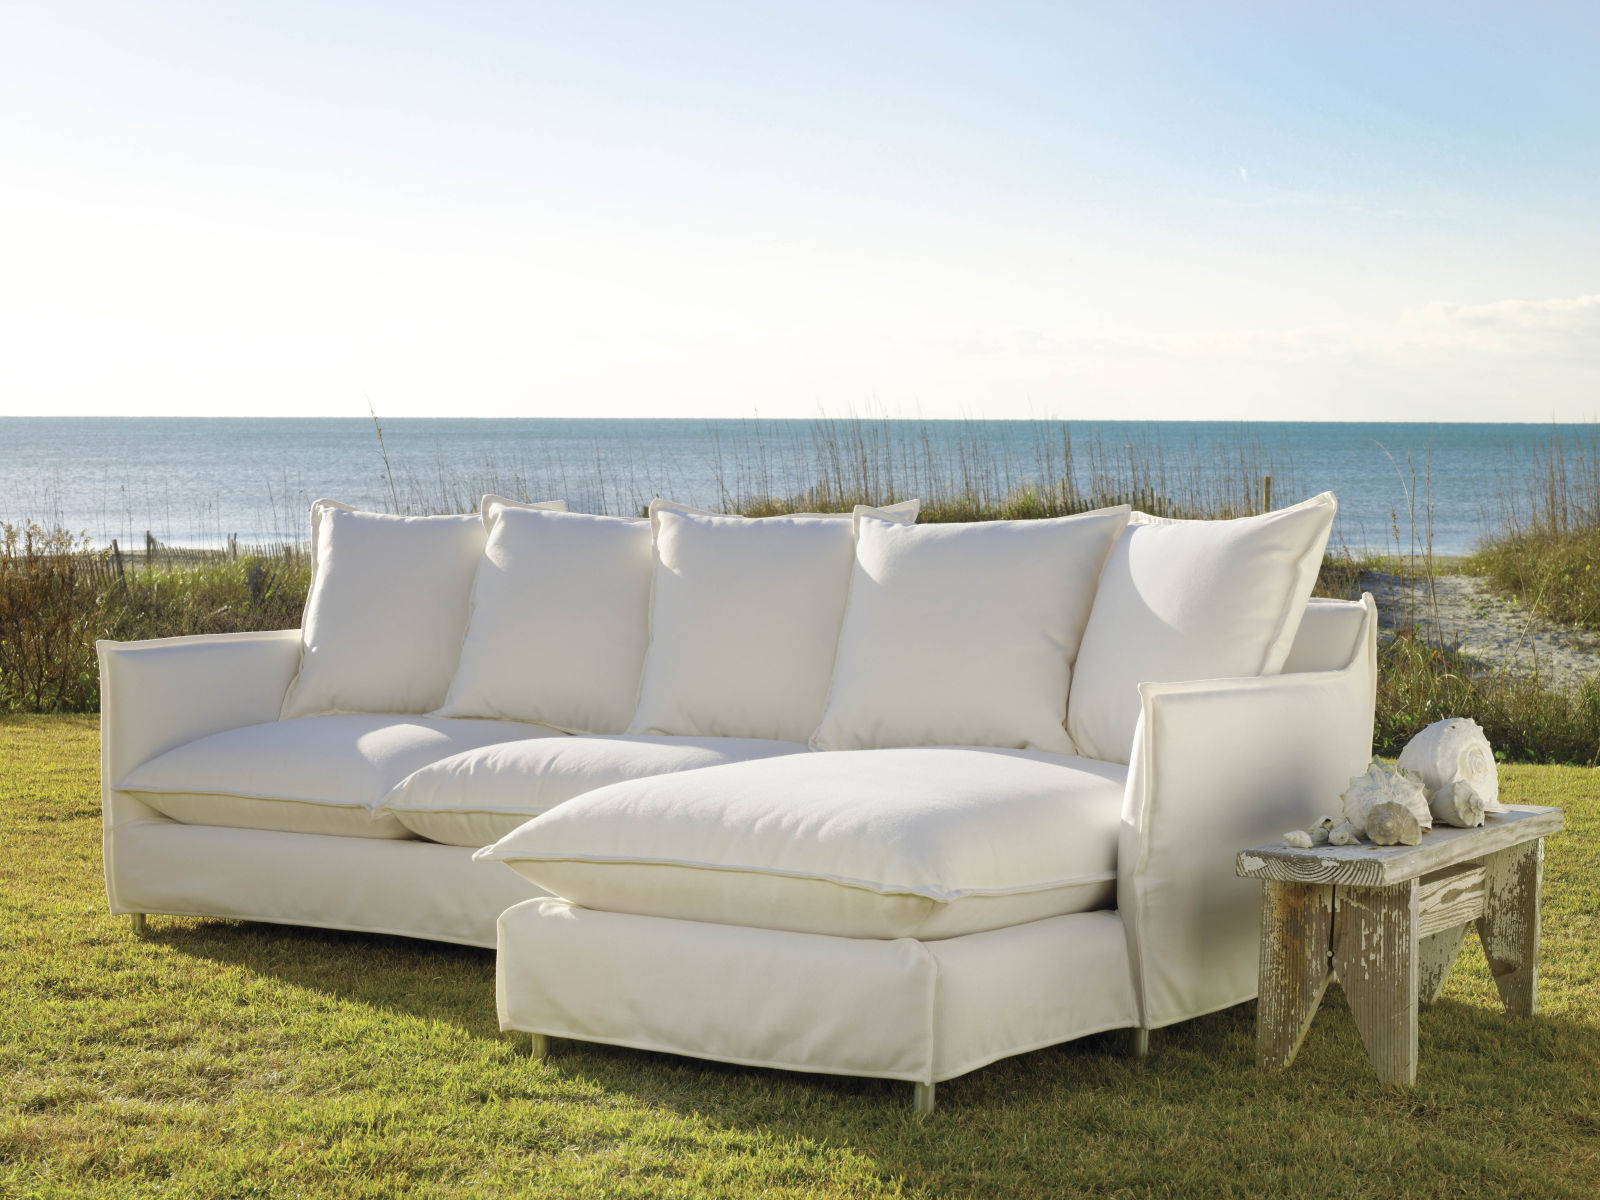 The Best Outdoor Sectional Furniture for Every Backyard AuthenTEAK